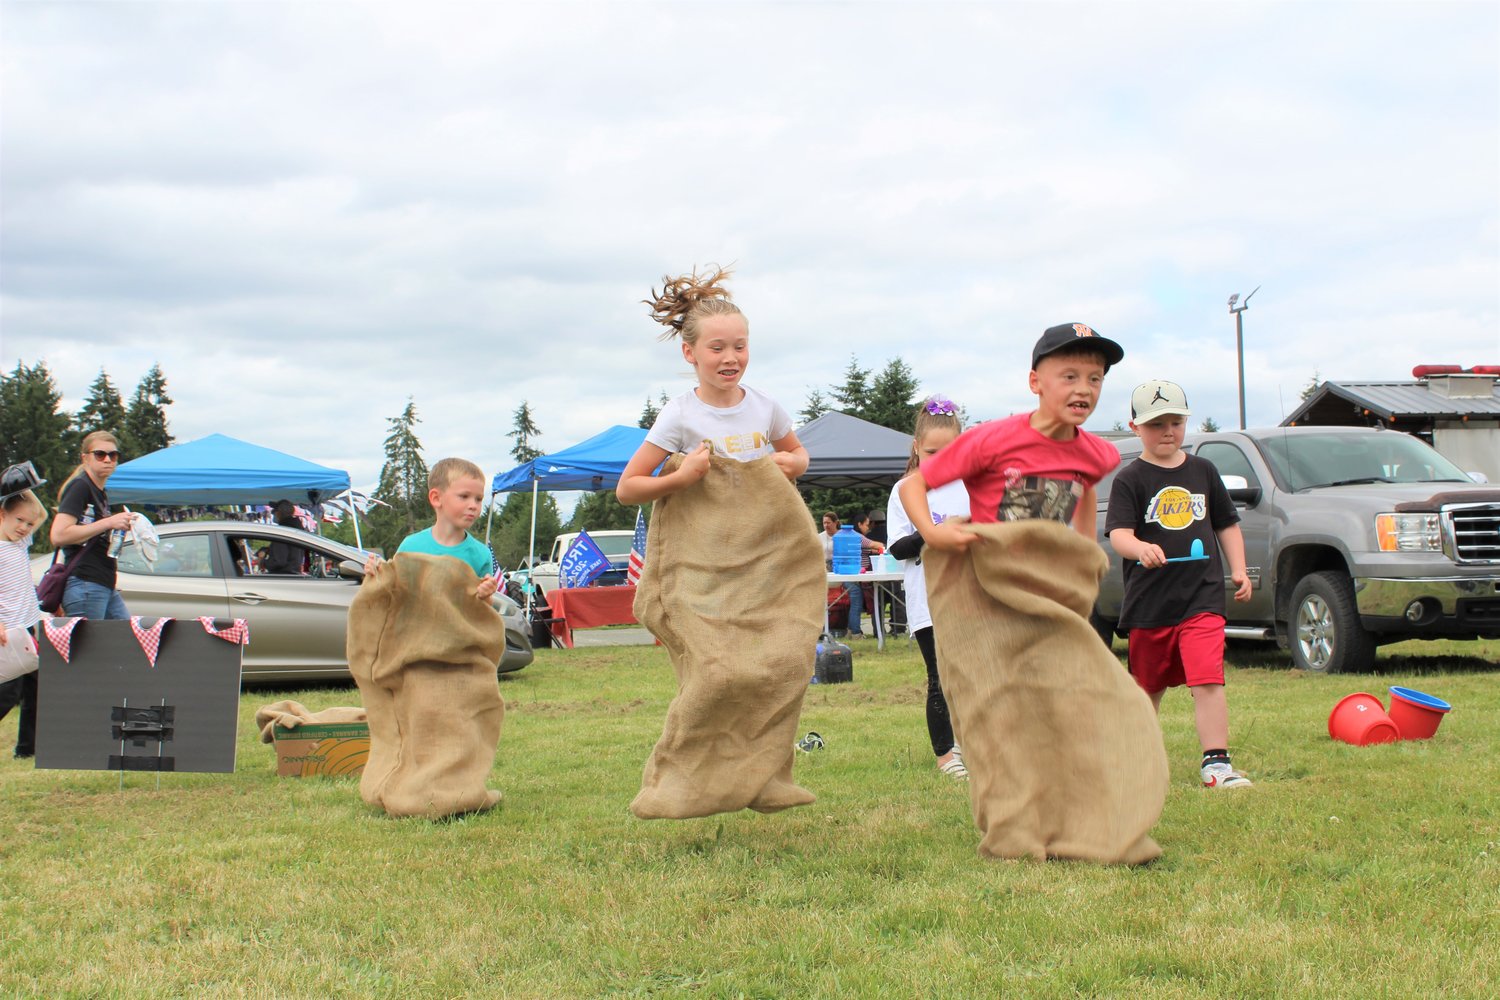 Wyatt Ozretitch, 4, Ashlynn Ozretitch, 9, and Wes Grandorff, 7, race against one another in the potato sack race in the Napavine Funtime Festival kids games area.